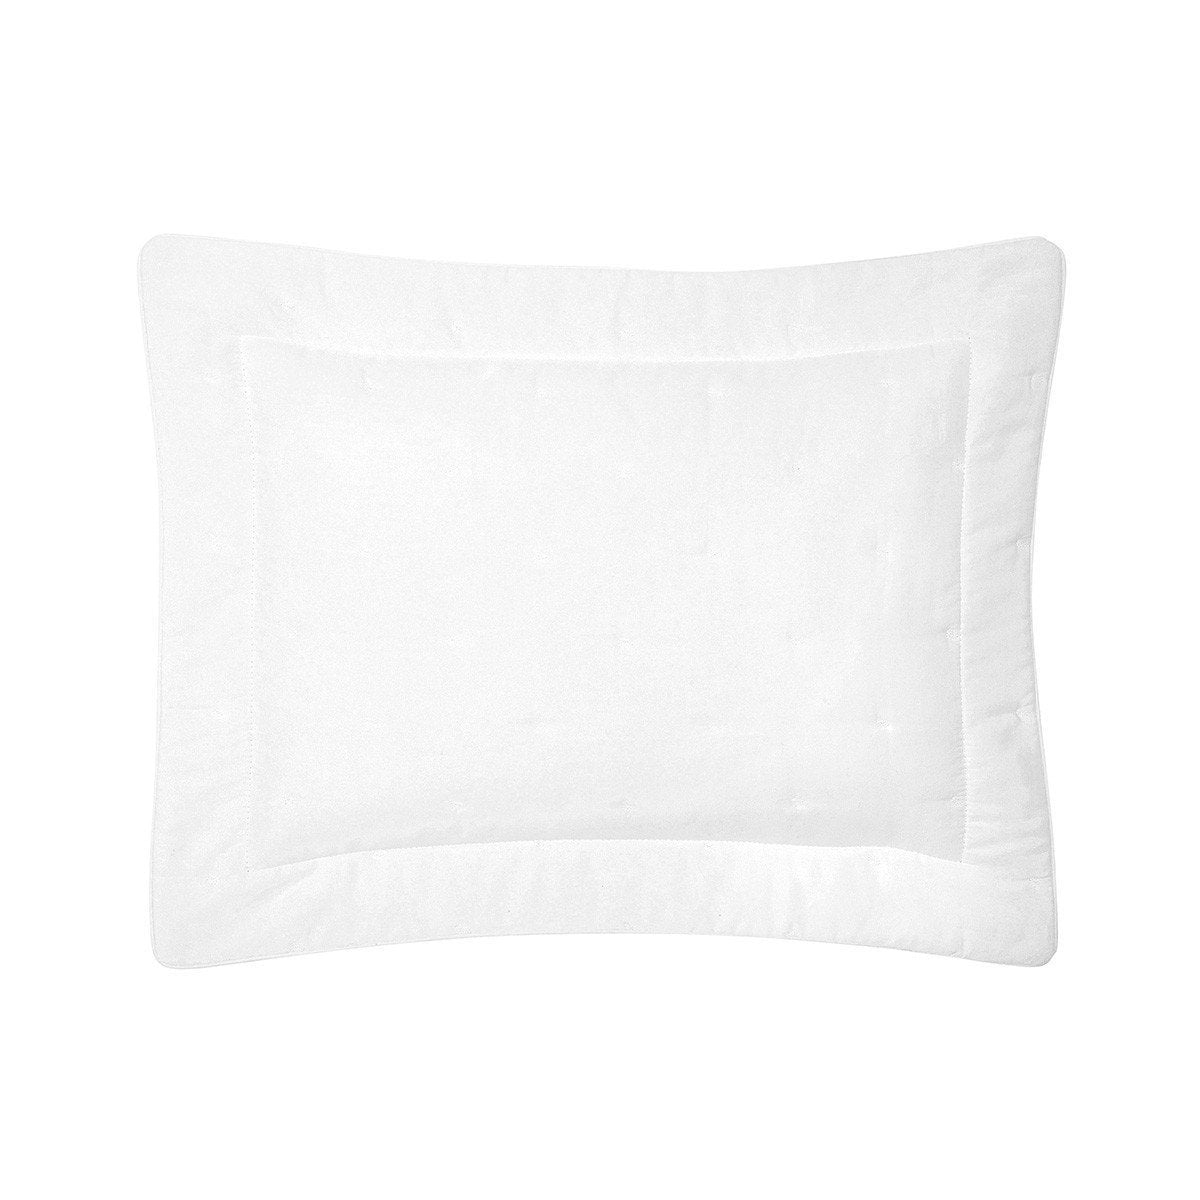 Fig Linens - Yves Delorme Triomphe Blanc Bedding - White Quilted Boudoir Sham 